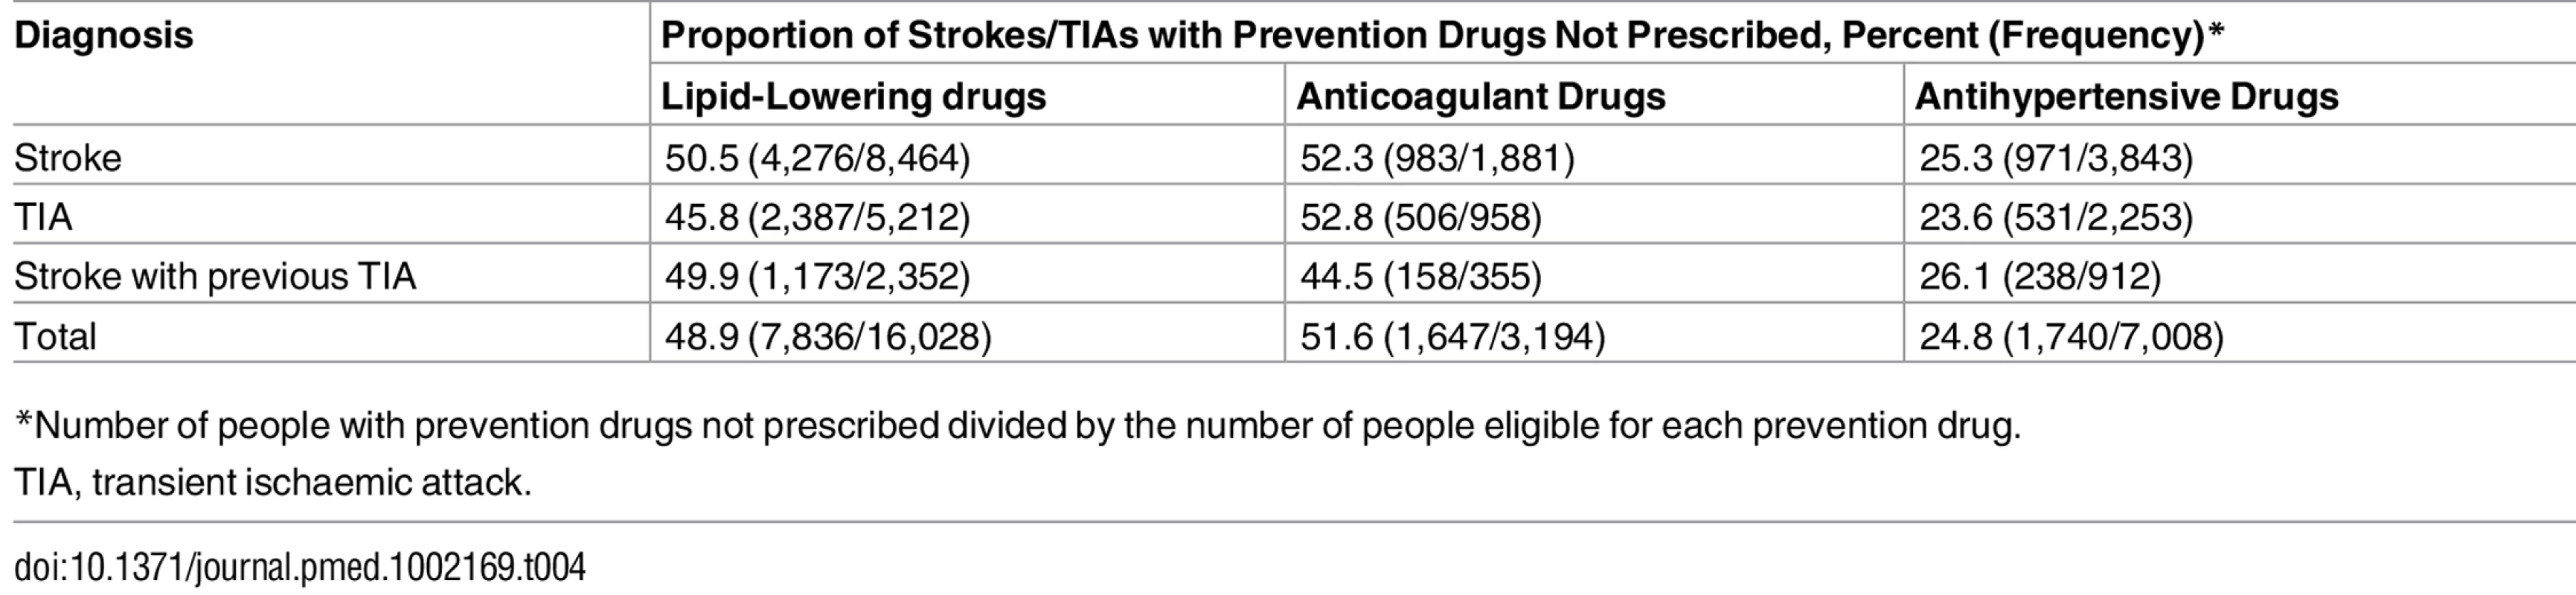 Proportion of stroke and transient ischaemic attack patients under-prescribed lipid-lowering, anticoagulant, and antihypertensive drugs for primary prevention.